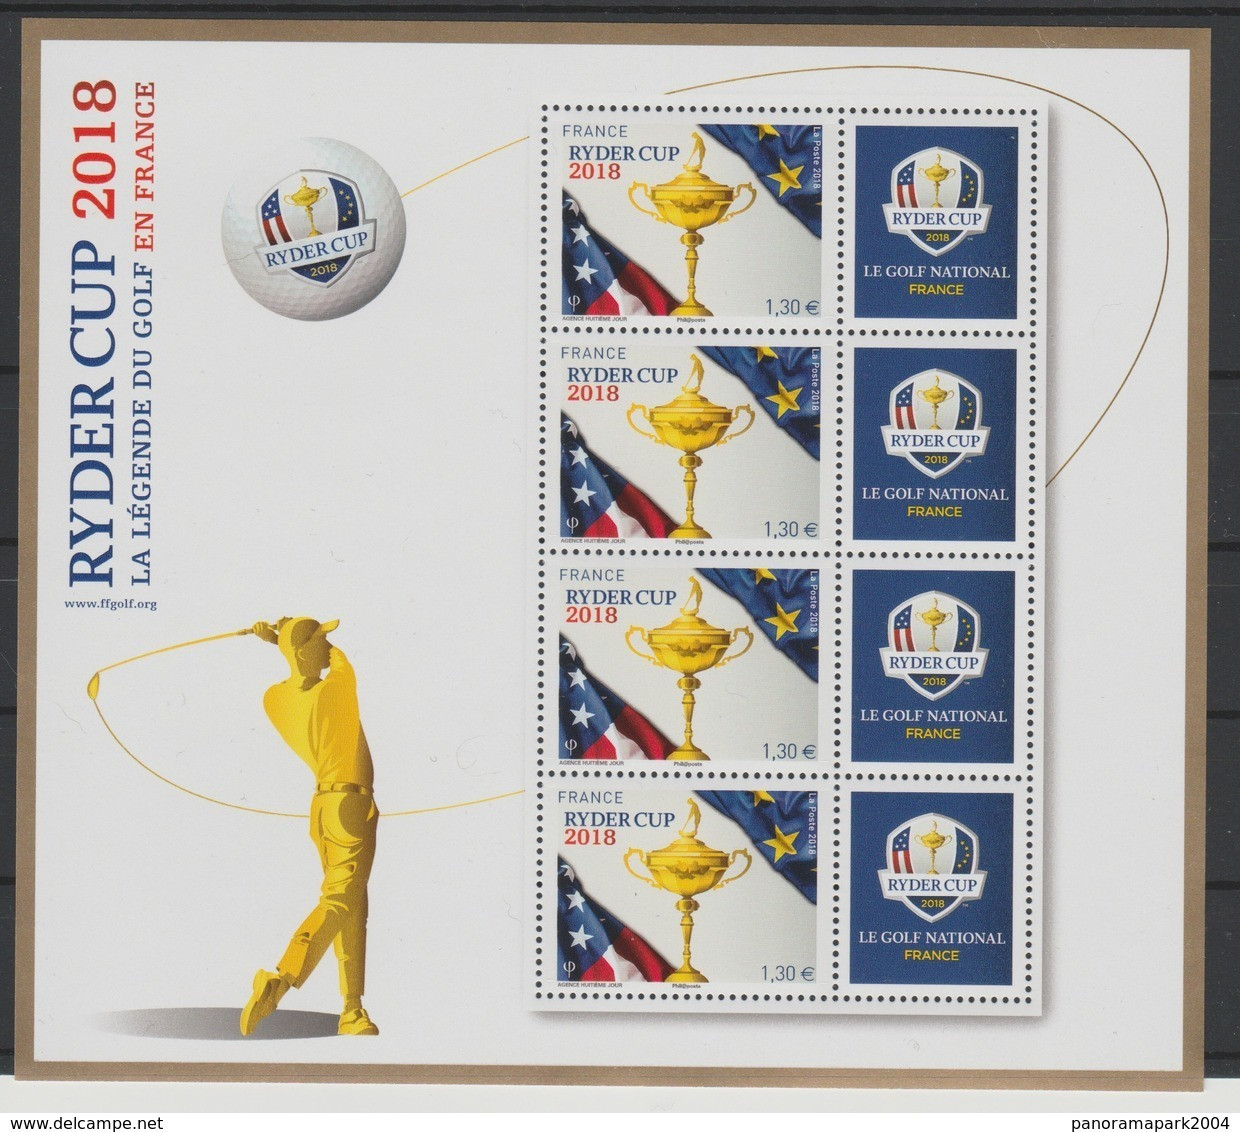 France 2018 - BF YT N°142 Mini-feuillet Bloc 4 Timbres Ryder Cup Golf LUXE MNH RARE ! Tirage 30 000 - Golf